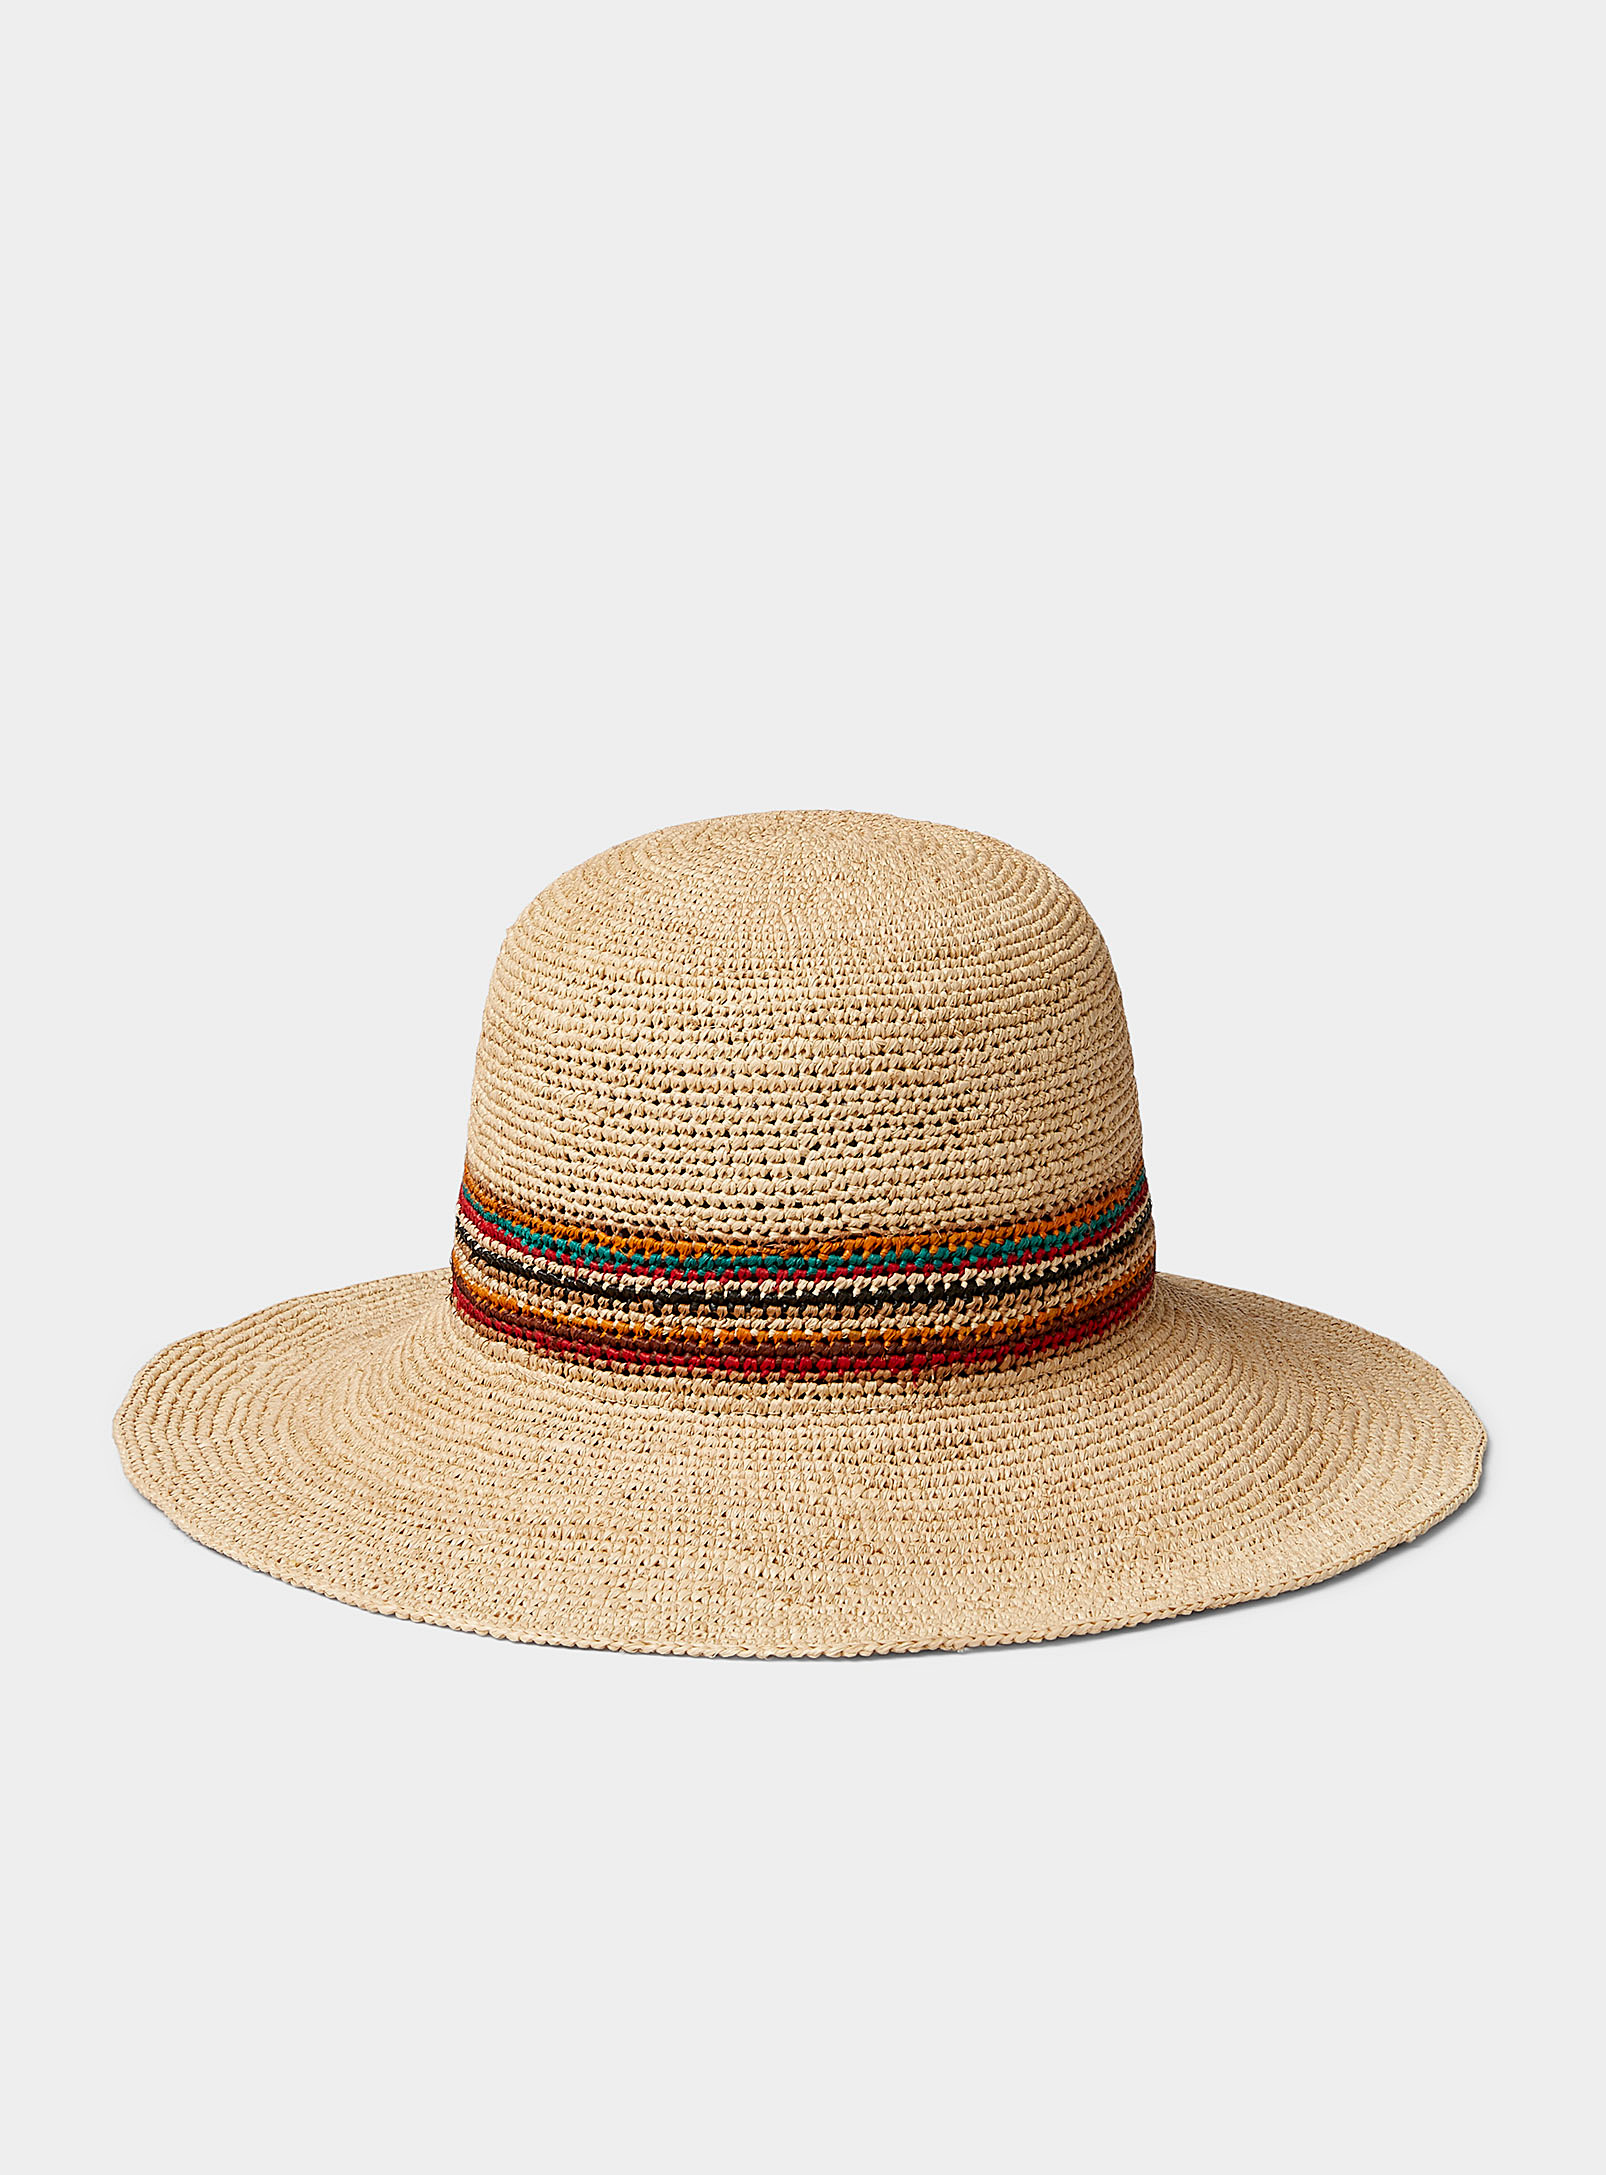 Paul Smith Embroidered Sun Hat In Sand